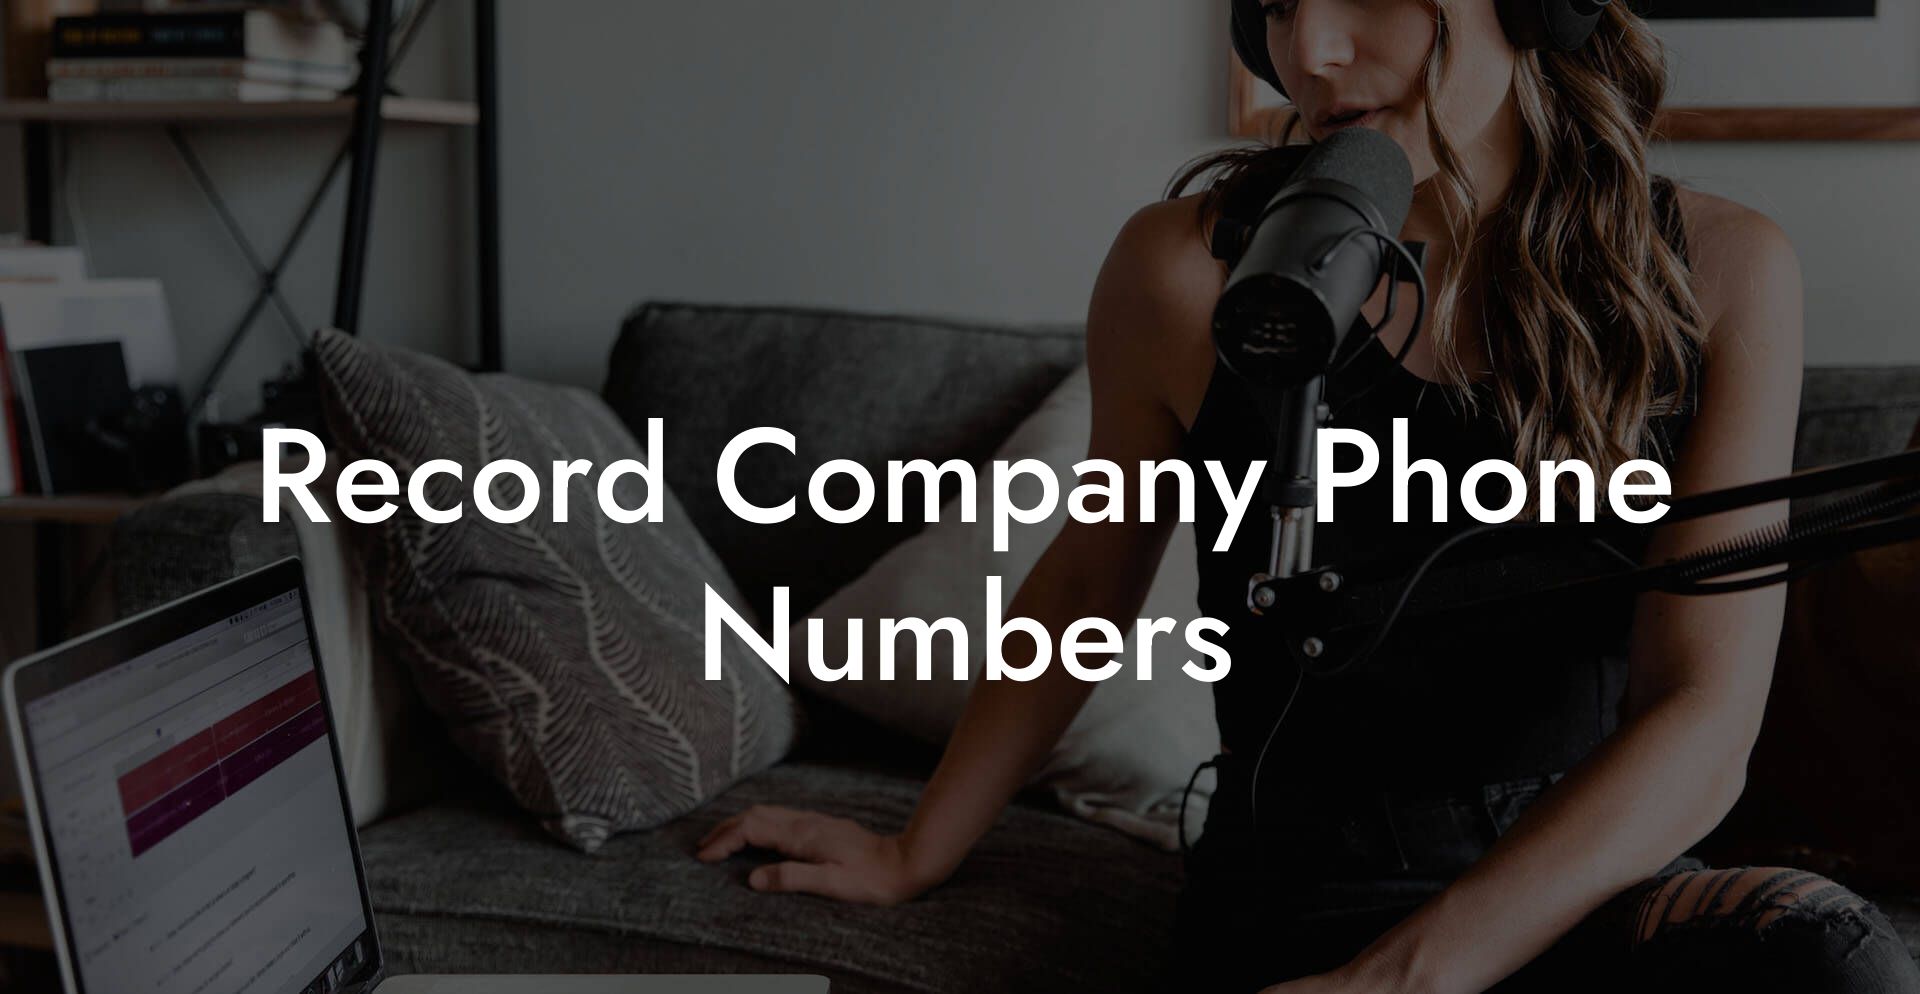 Record Company Phone Numbers